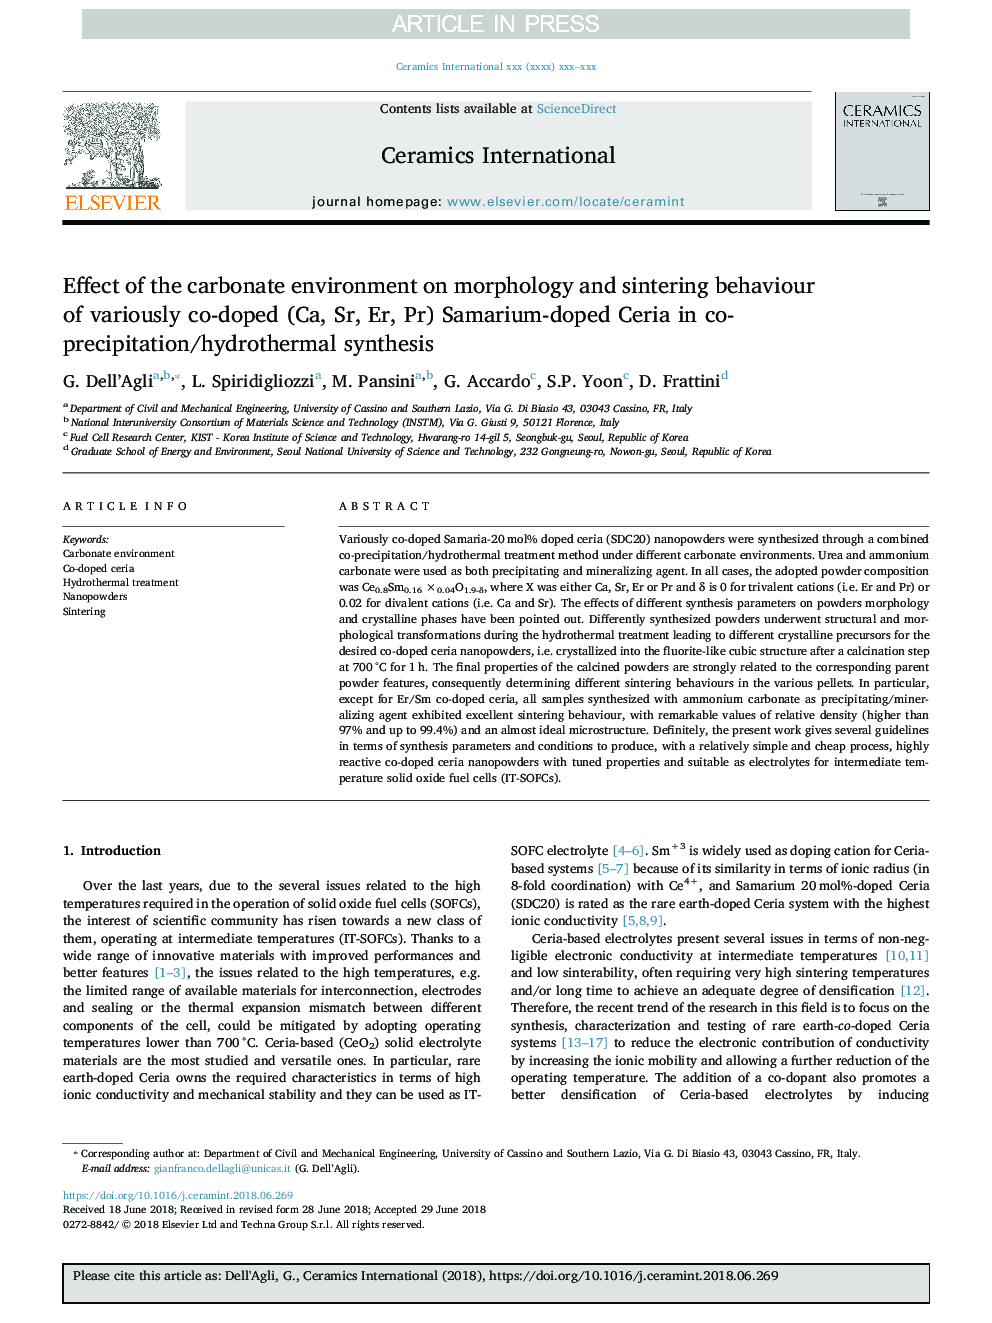 Effect of the carbonate environment on morphology and sintering behaviour of variously co-doped (Ca, Sr, Er, Pr) Samarium-doped Ceria in co-precipitation/hydrothermal synthesis